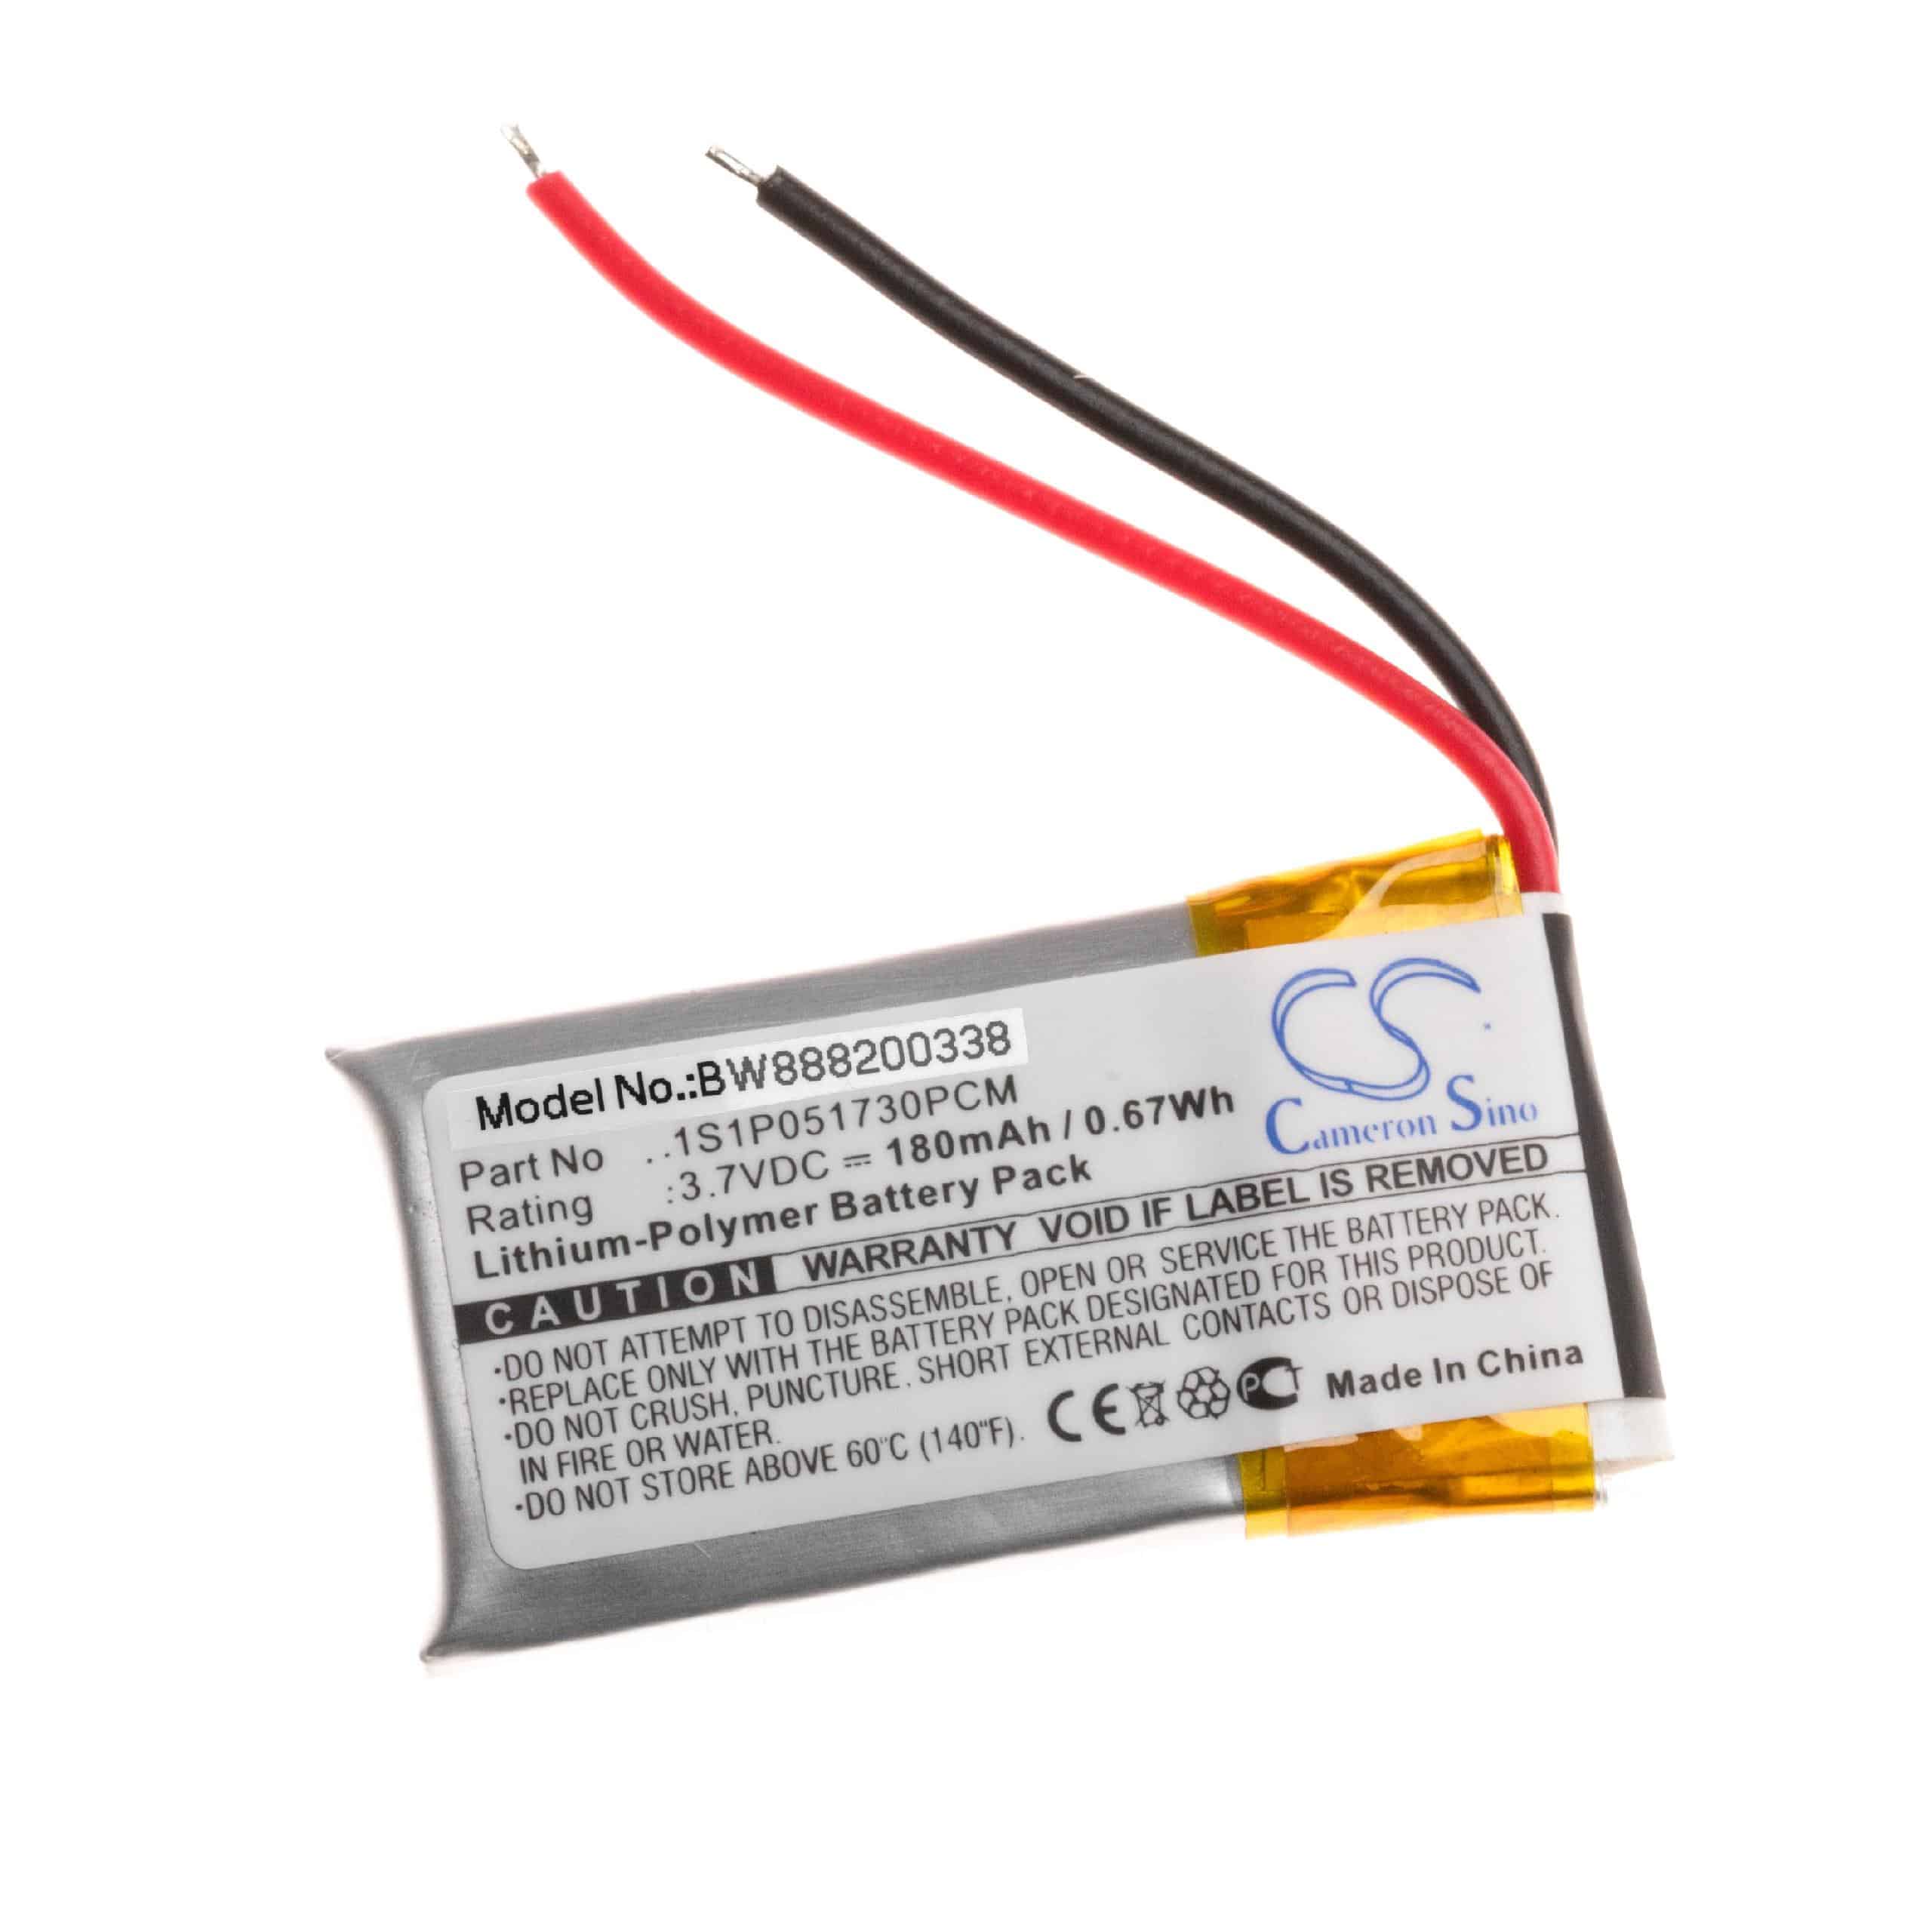 Wireless Headset Battery Replacement for GN 1S1P051730PCM - 180mAh 3.7V Li-polymer